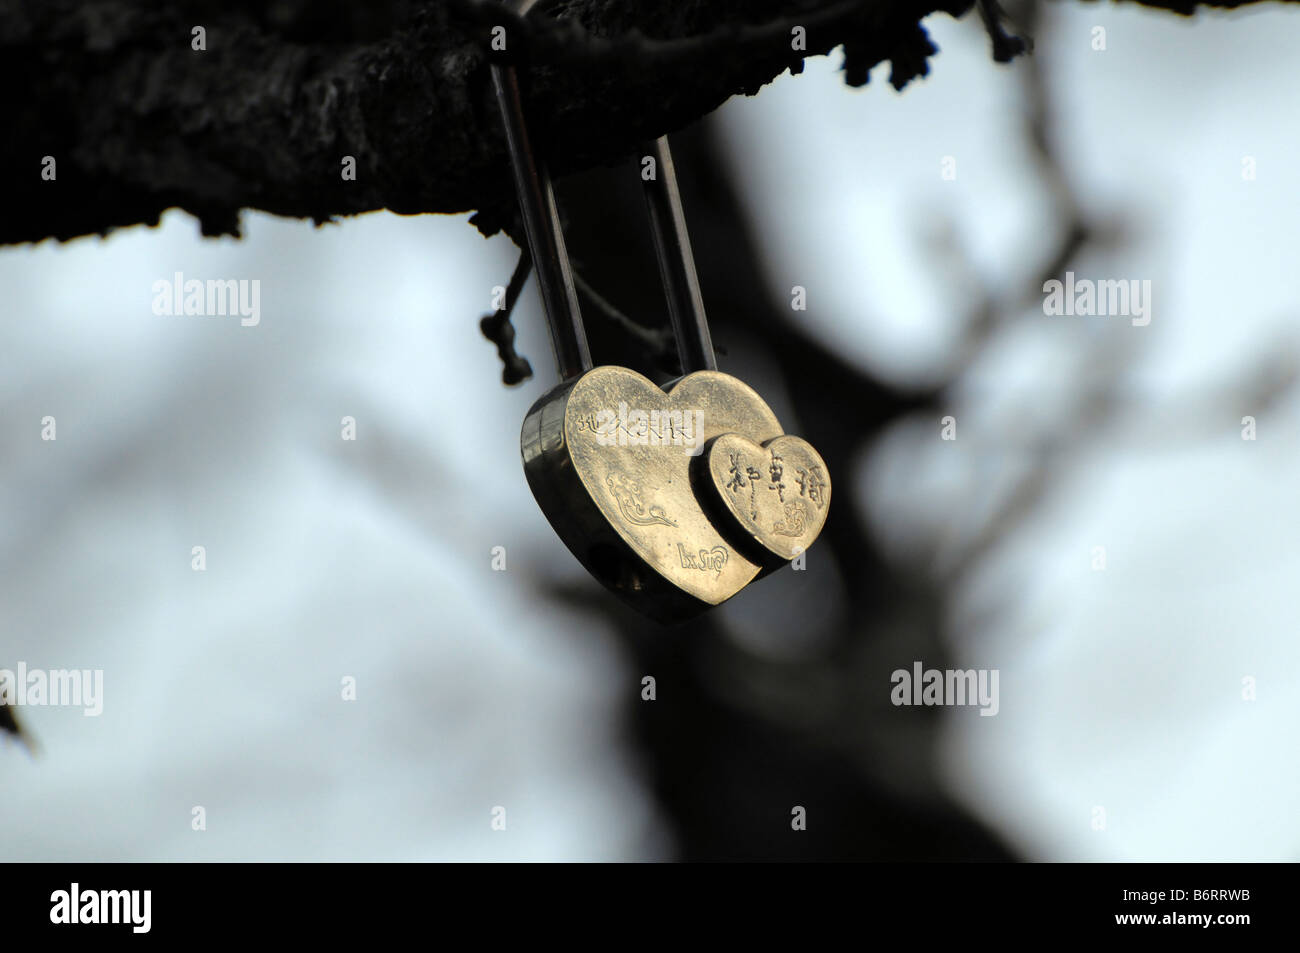 Love token, Huangshan, Yellow Mountain, China. Couples leave a lock on the mountain to show they will stay together forever. Stock Photo